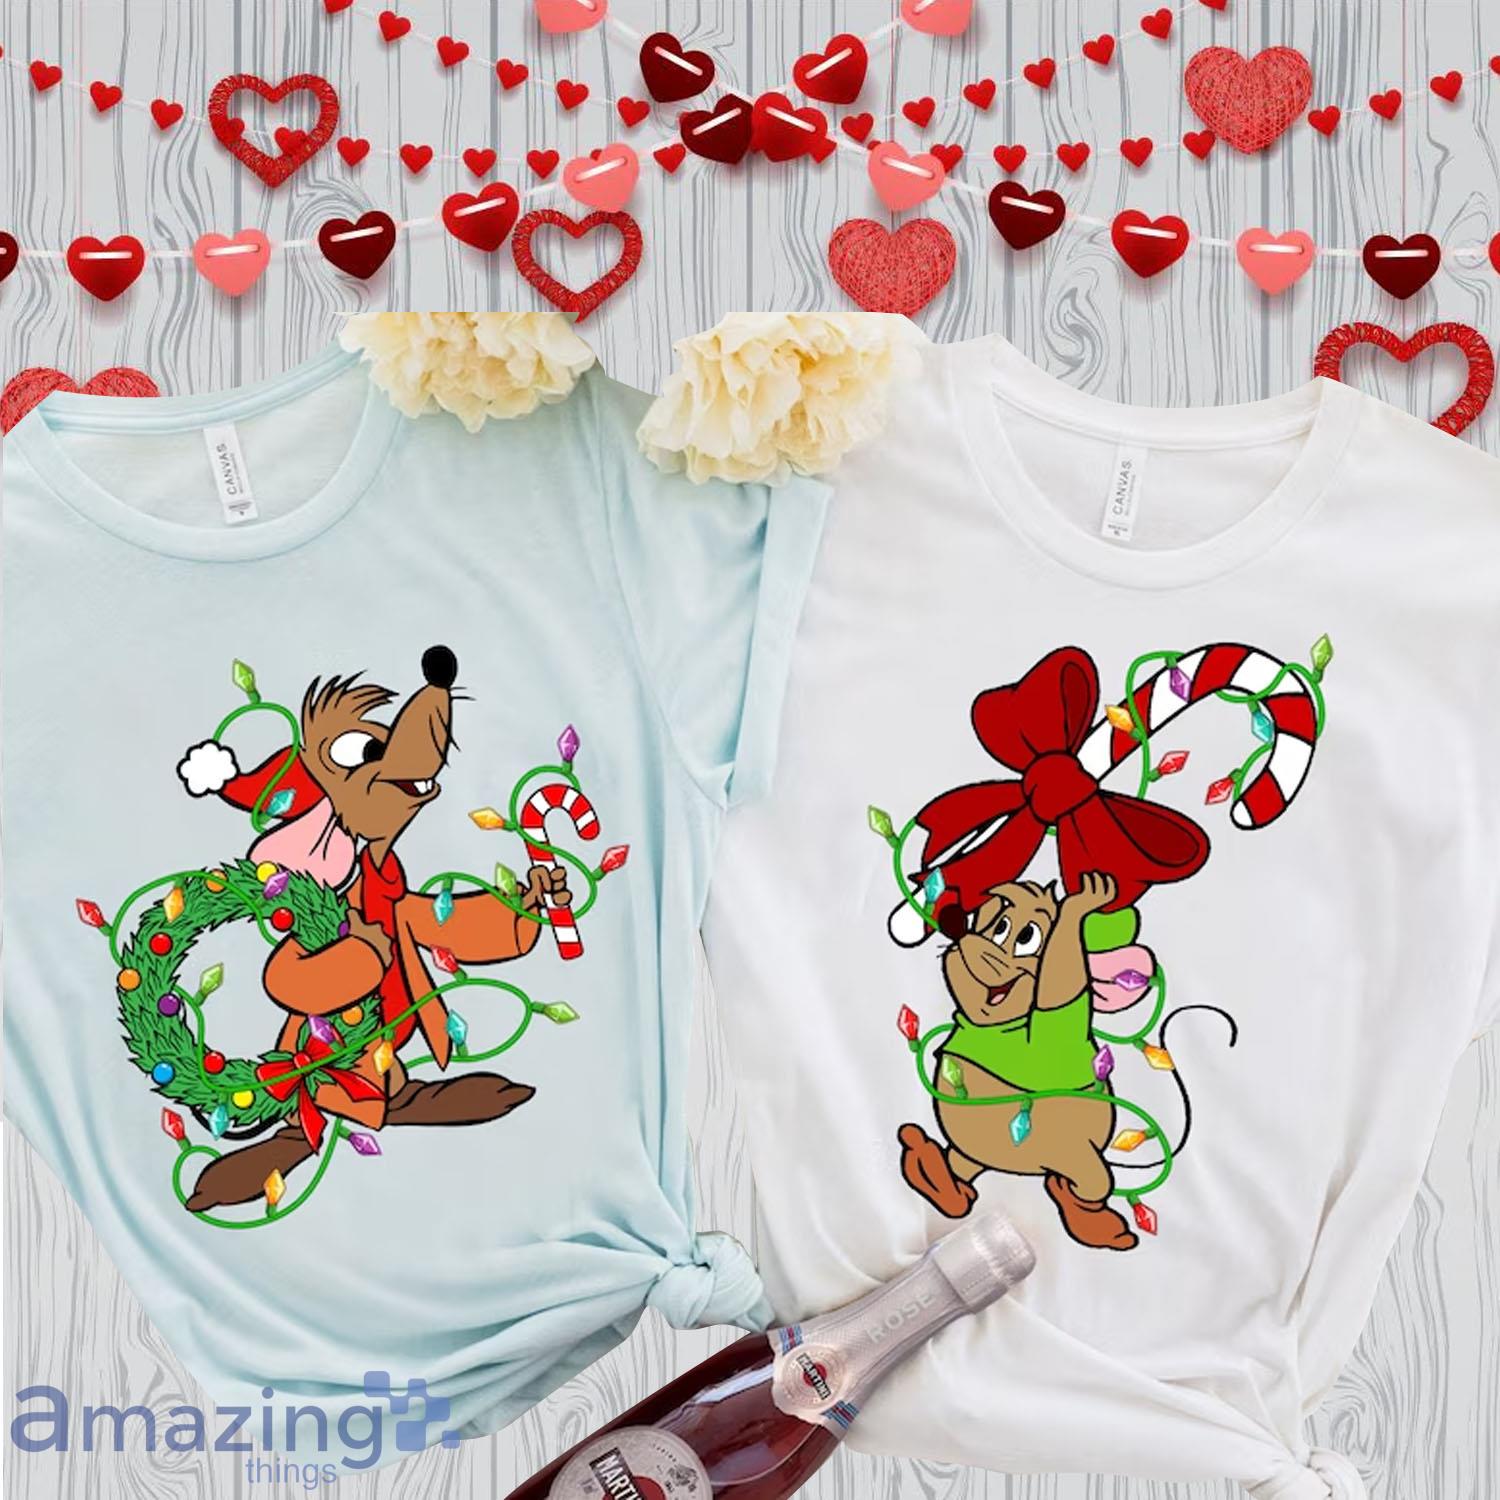 Disney Couples Jaq and Gus Cinderella Christmas Lights Valentine's Day Matching Couple Shirt - Disney Couples Jaq and Gus Cinderella Christmas Lights Valentine's Day Matching Couple Shirt